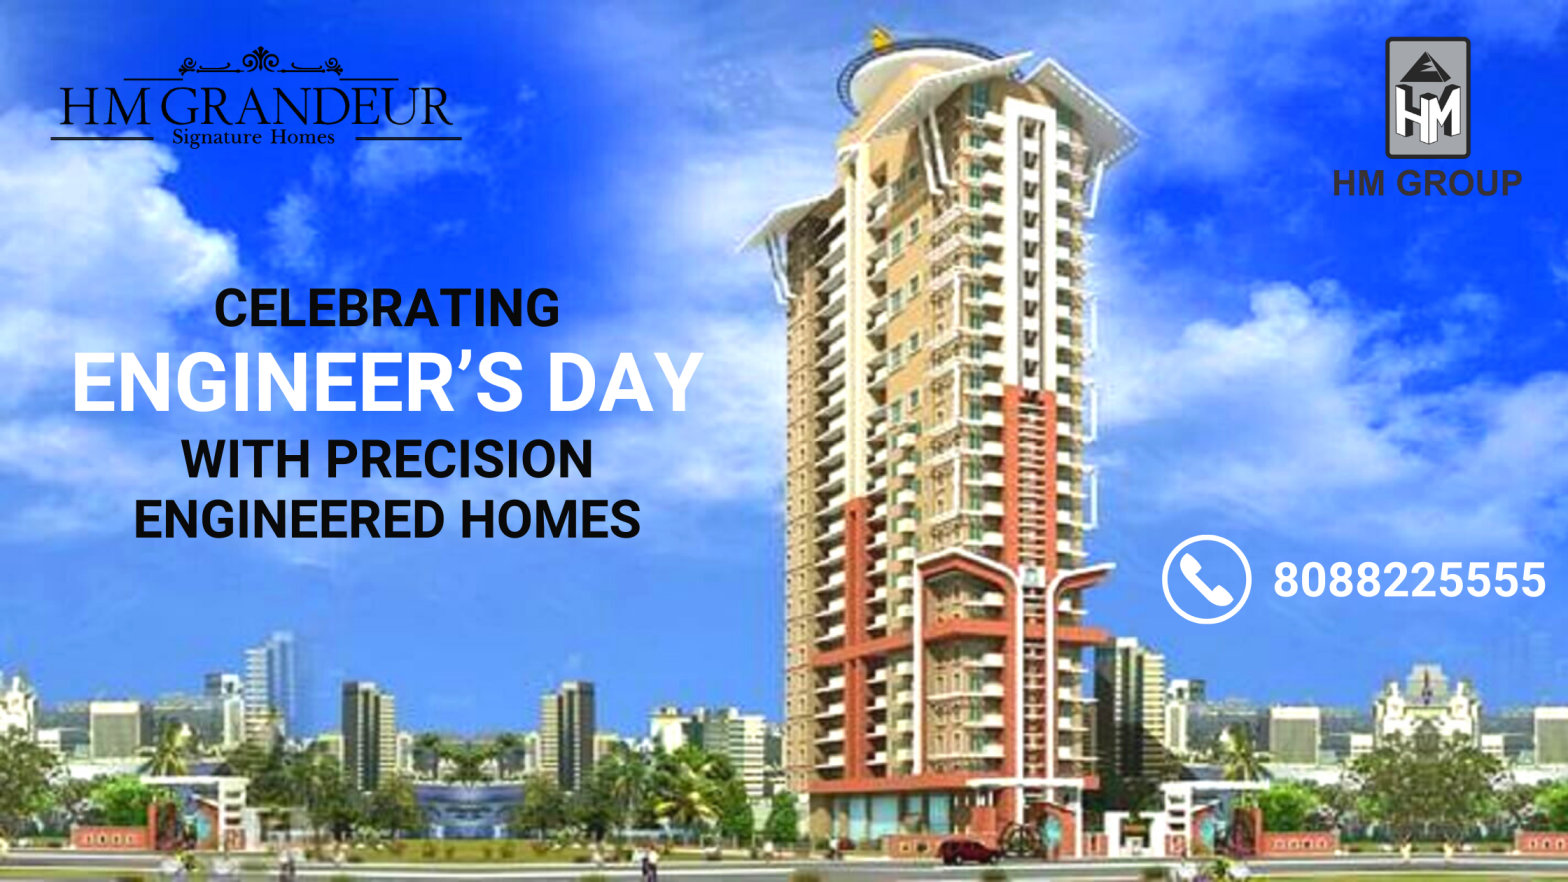 Celebrating Engineer’s Day with Precision Engineered Homes by HM Group